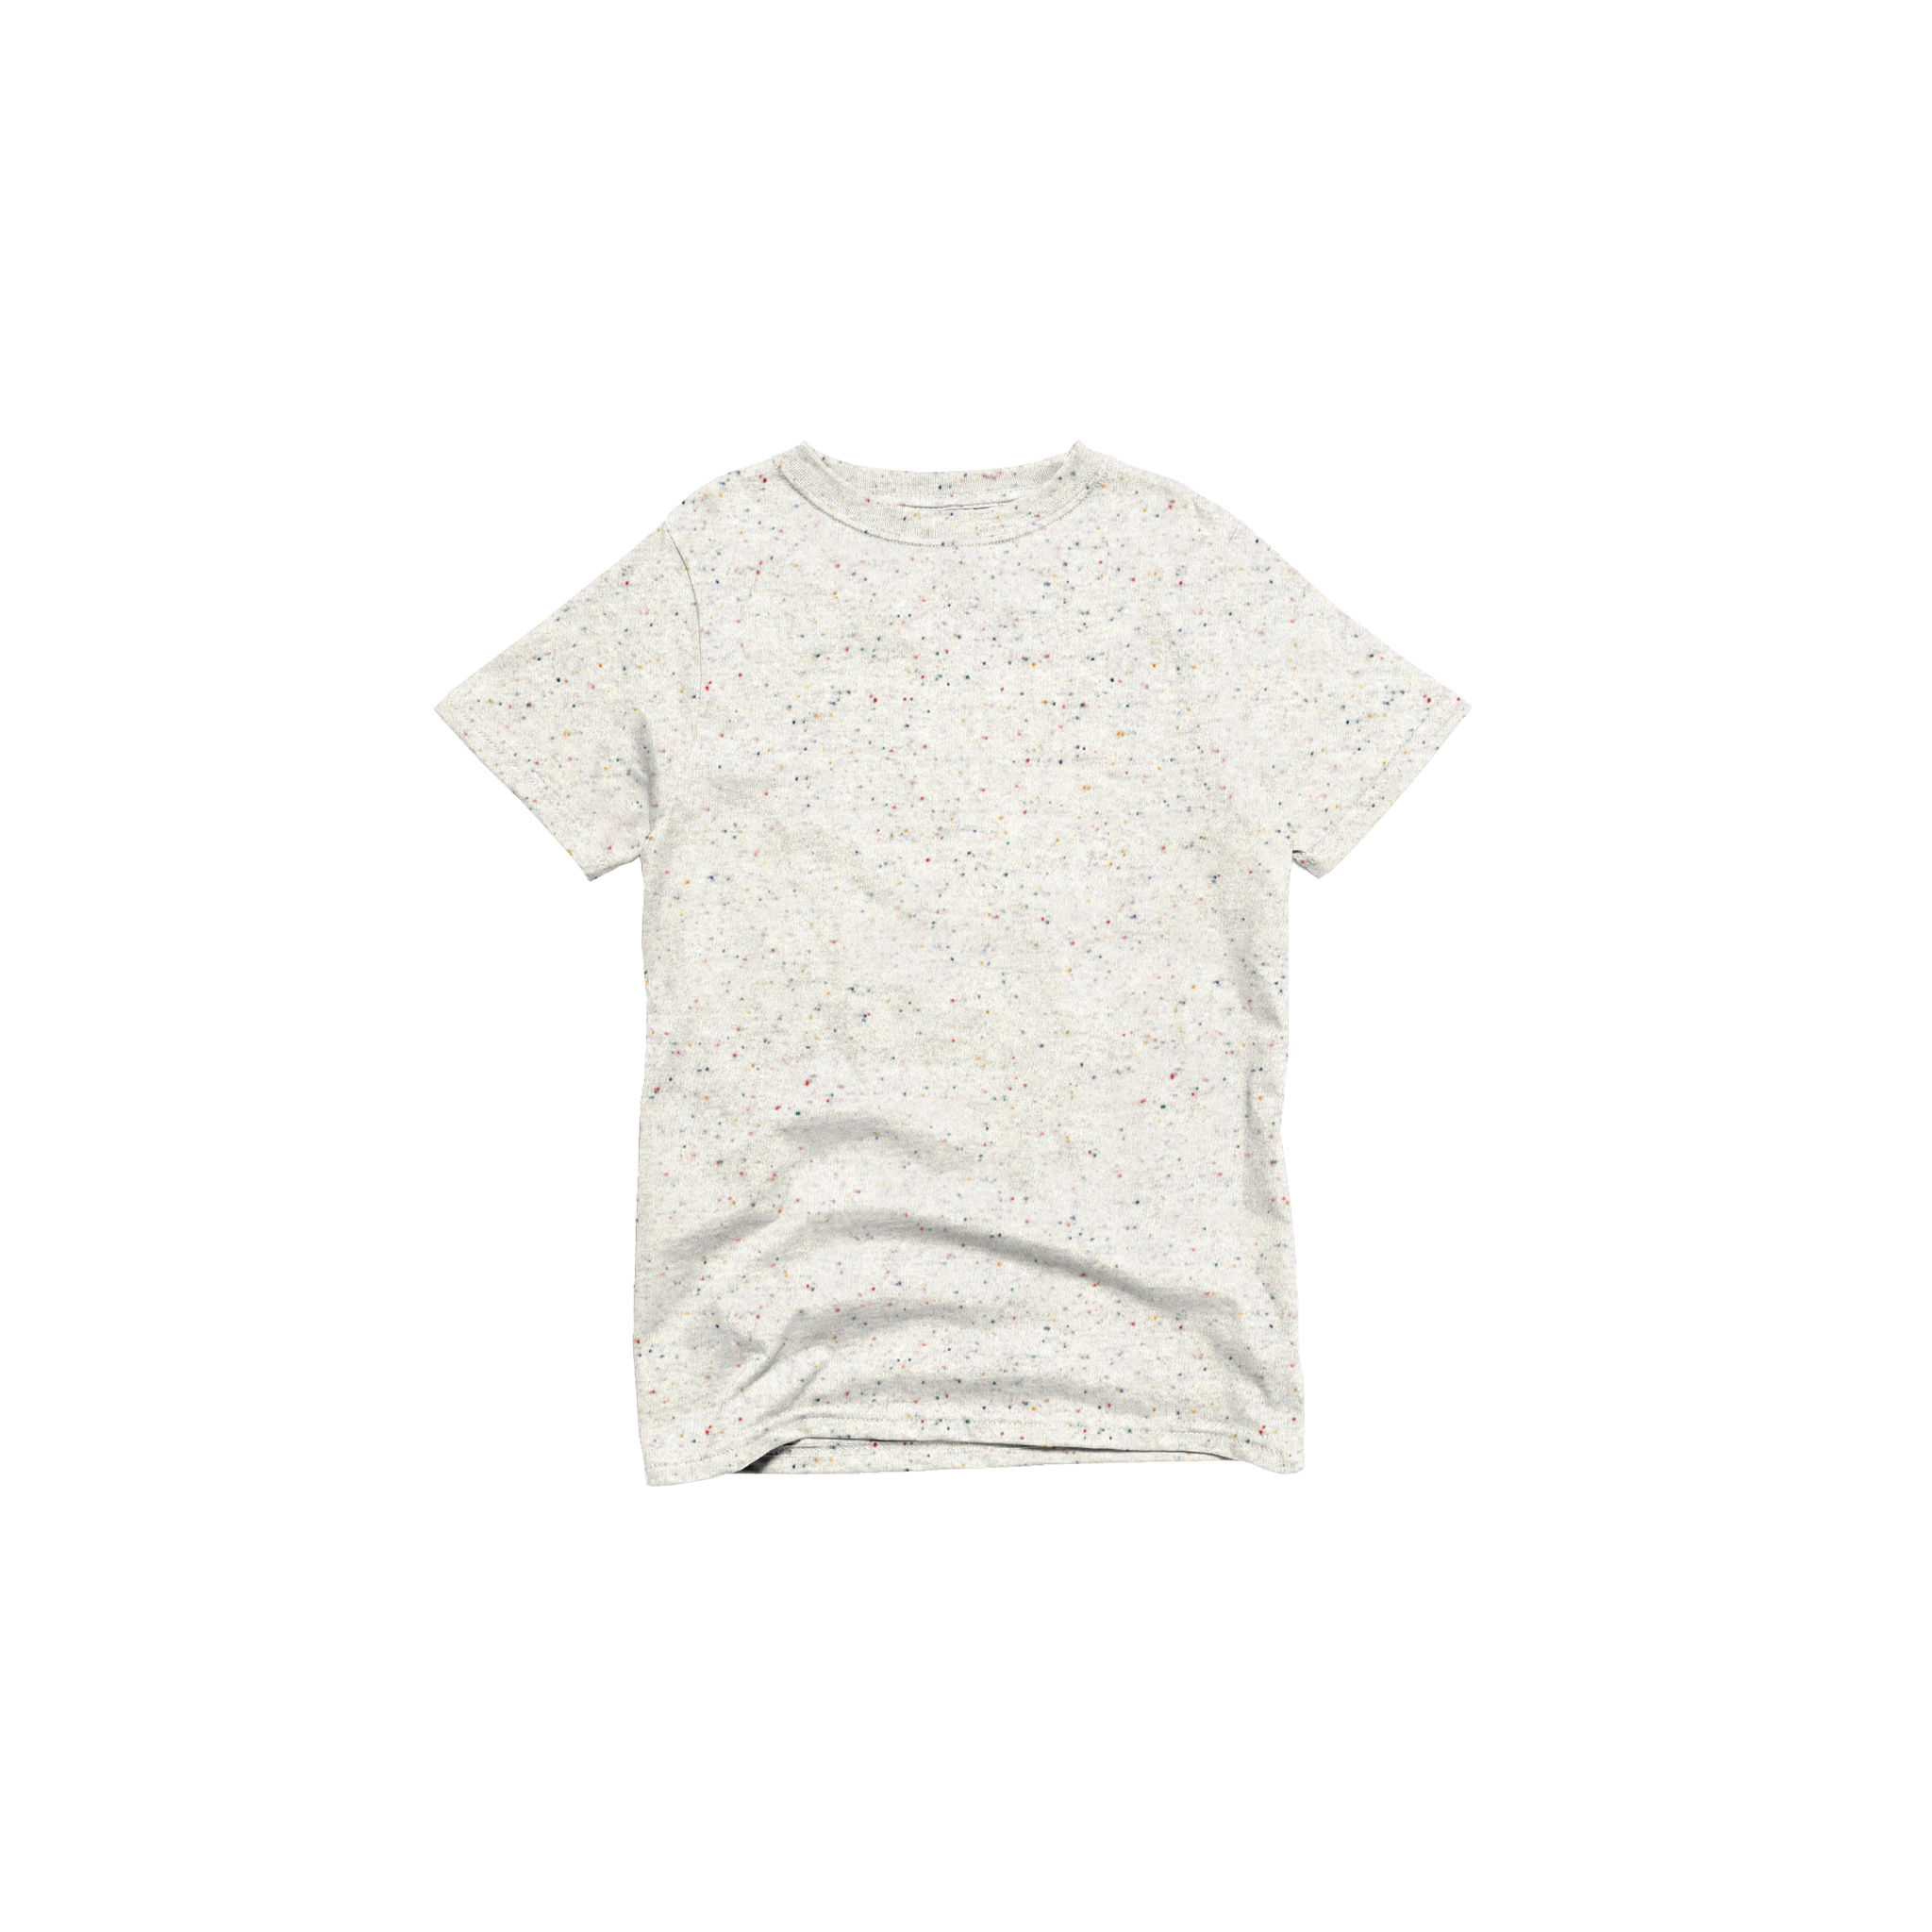 Front Flat Lay of GOEX Youth Eco Cotton Tee in Funfetti